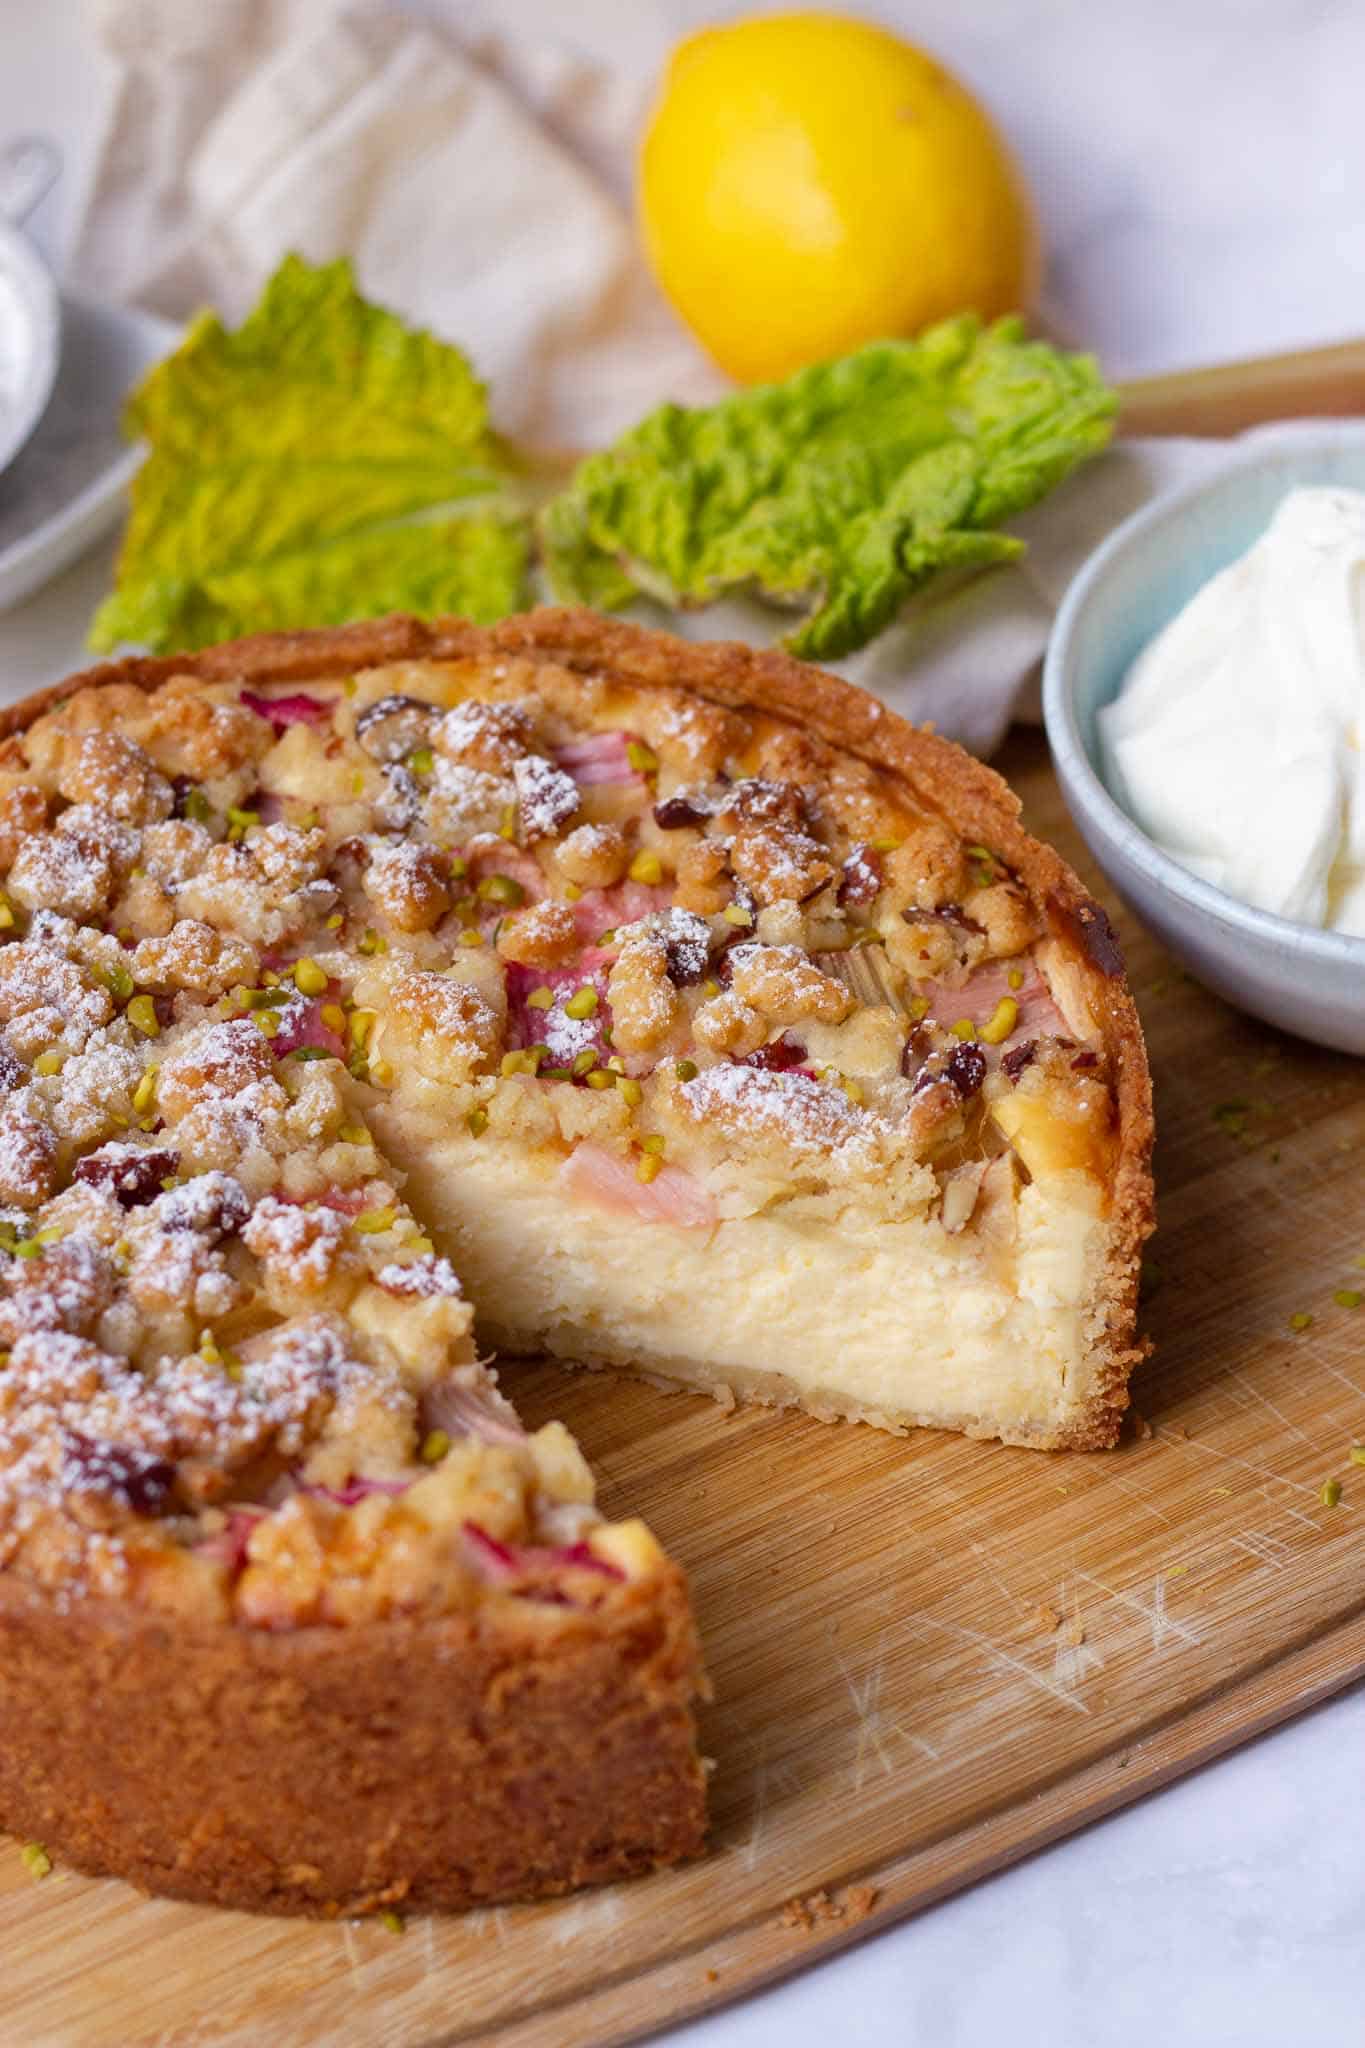 A sliced german rhubarb cheesecake from the springform pan with streusel.